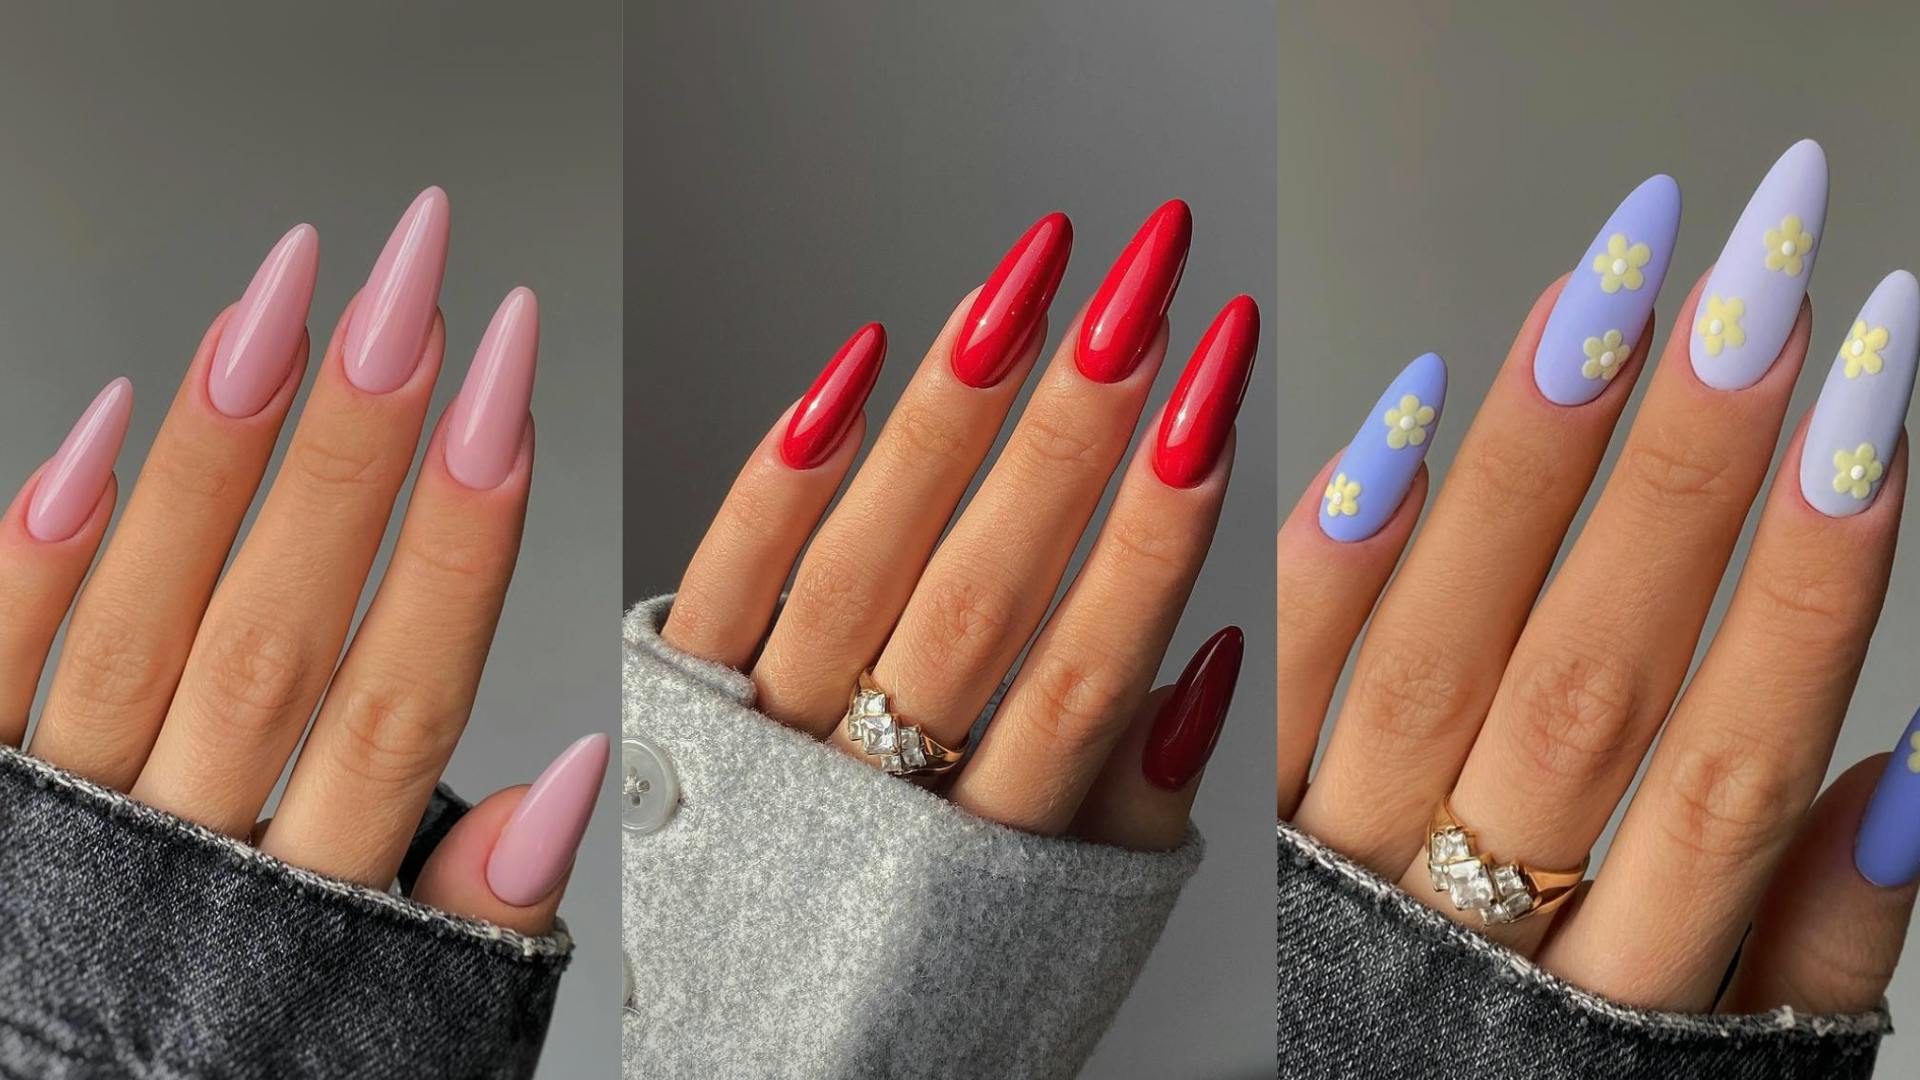 The Brightest And Most Fun Nail Art Ideas To Help You Transition Into  Spring - VIVA GLAM MAGAZINE™